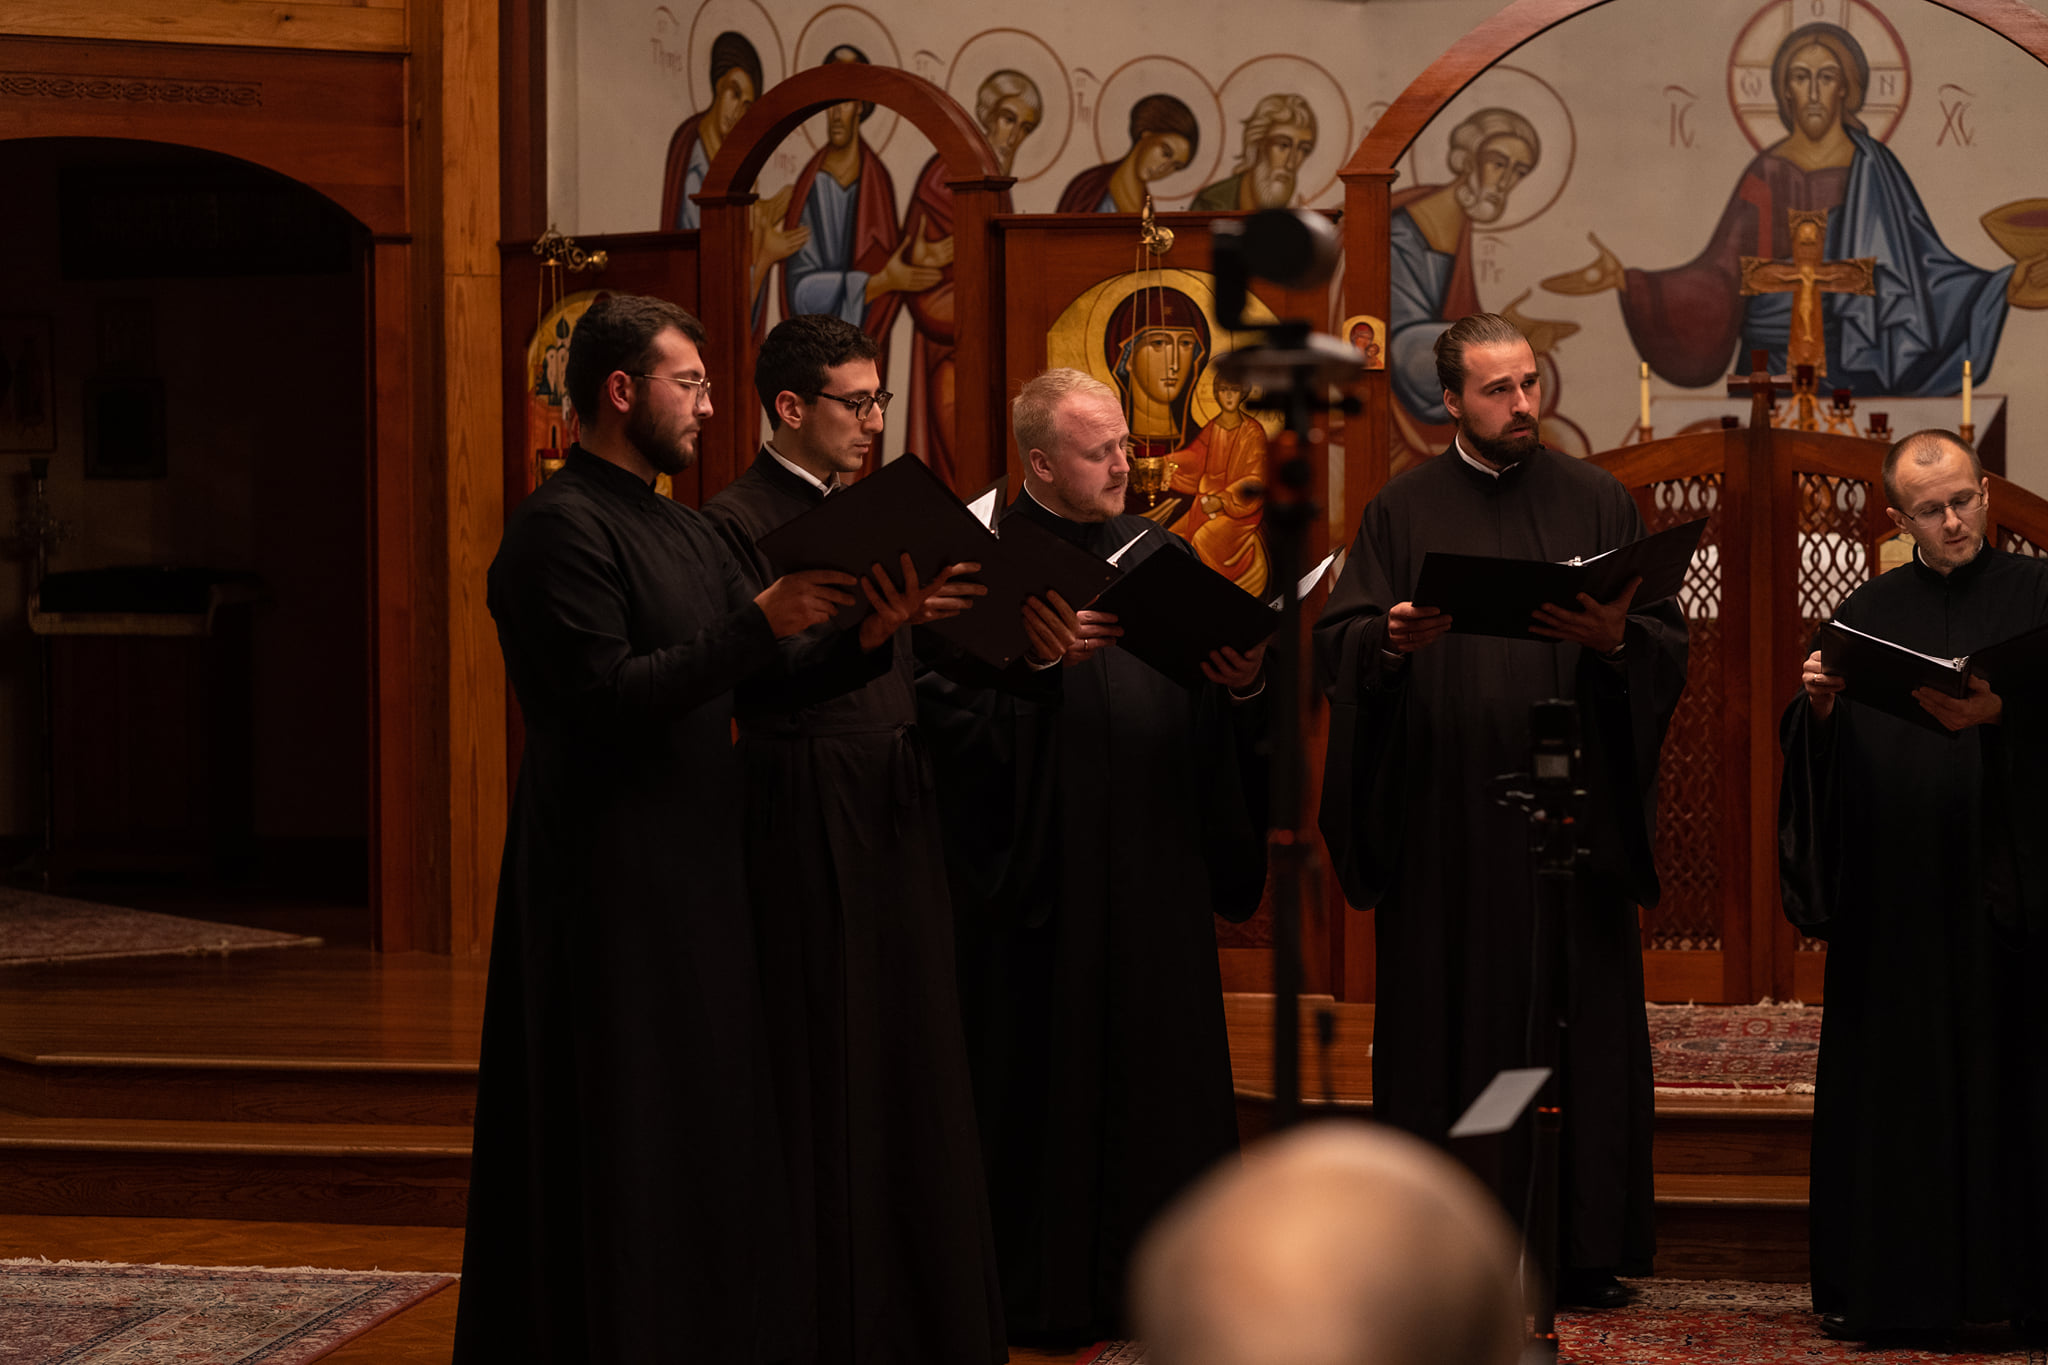 Scenes from Tronos Psaltic Group Performance